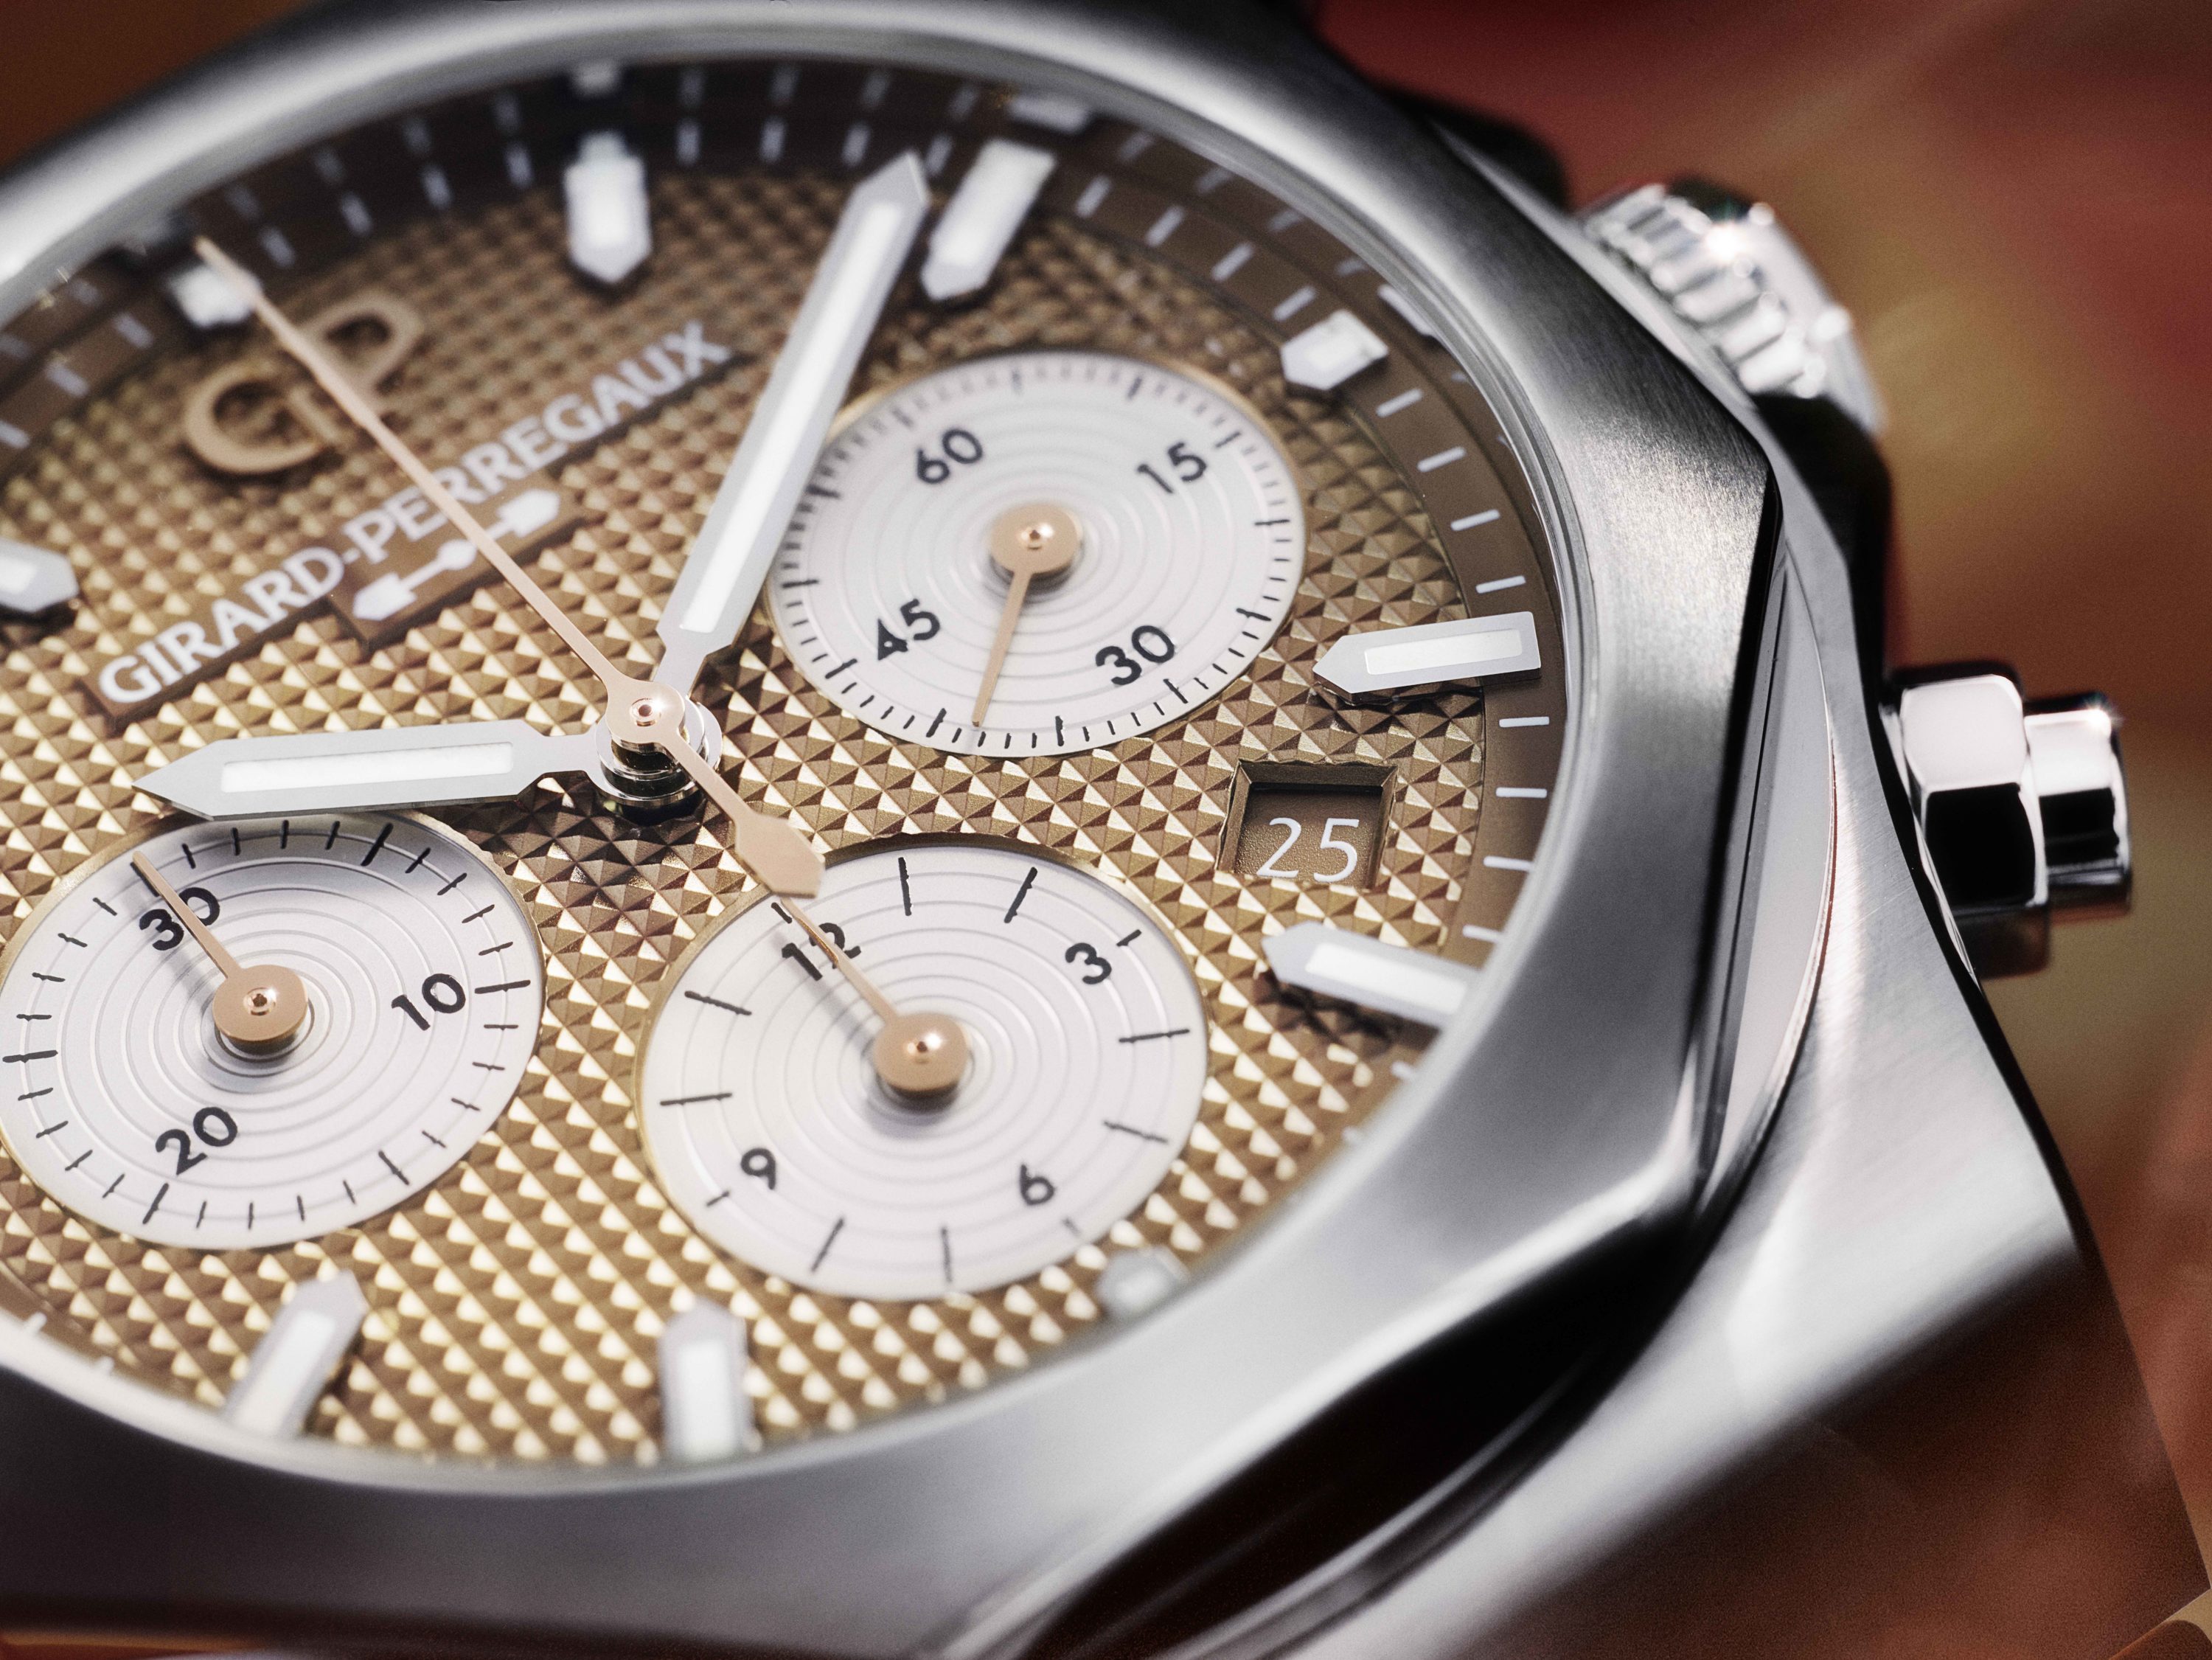 Wempe Launches Third Model of “Signature Collection” with Girard-Perregaux